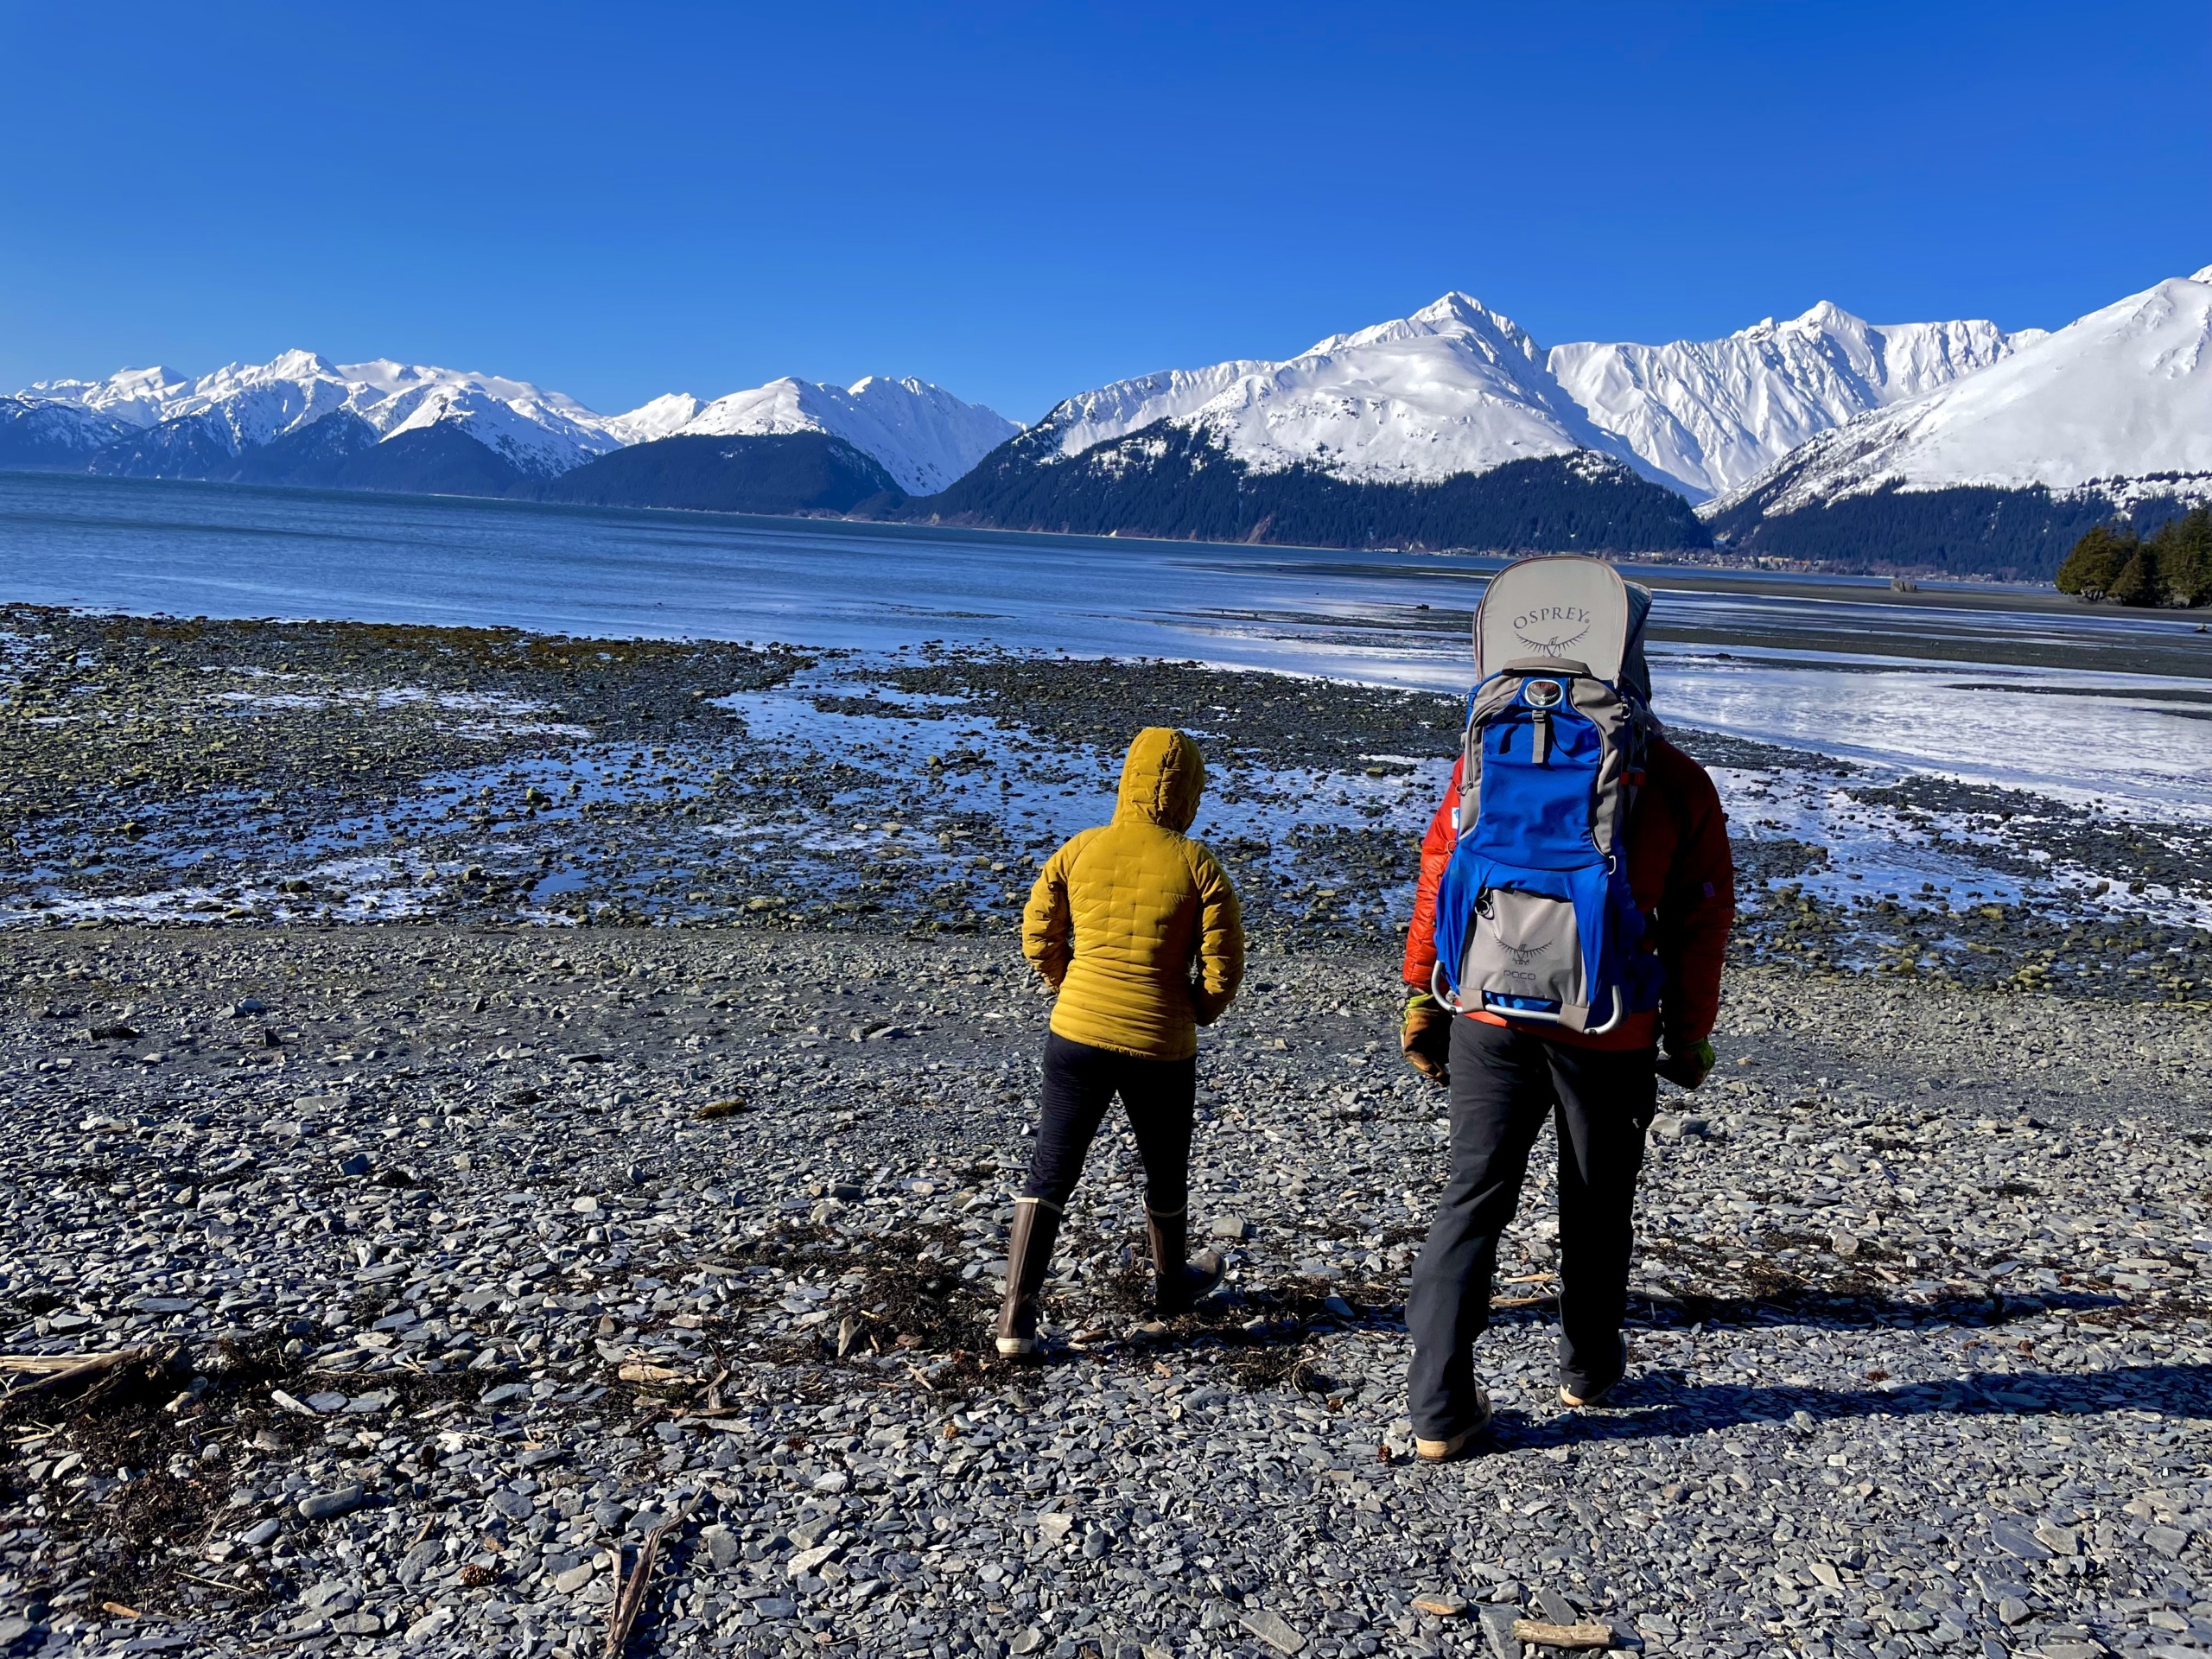 Photo of people walking on rocky beach near Seward with snowy mountains in background